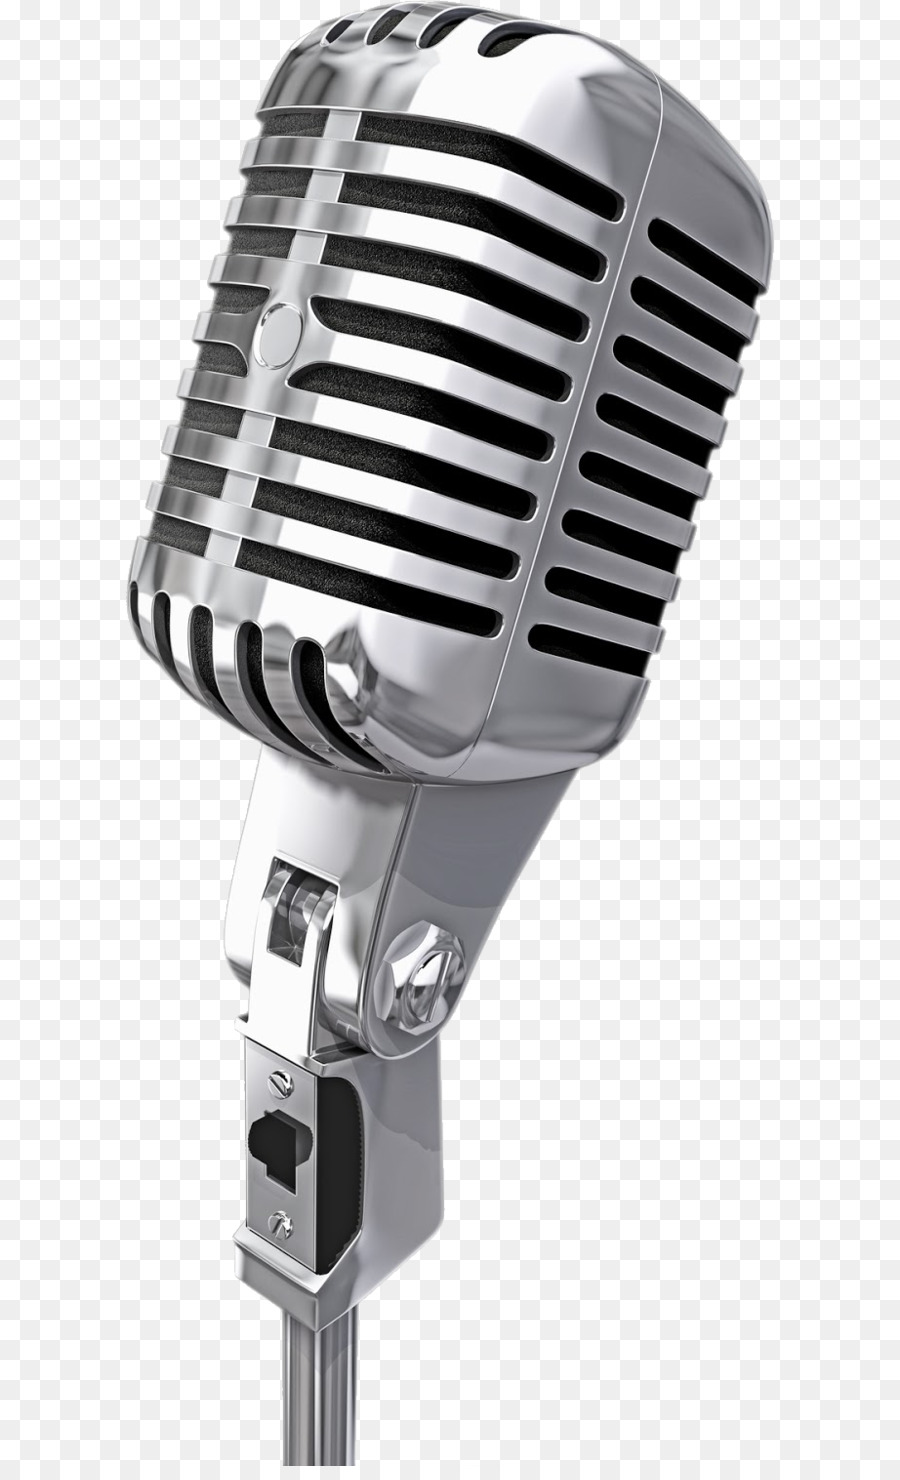 Free Microphone Png - Microphone Clip Art   Microphone Png Image, Transparent background PNG HD thumbnail